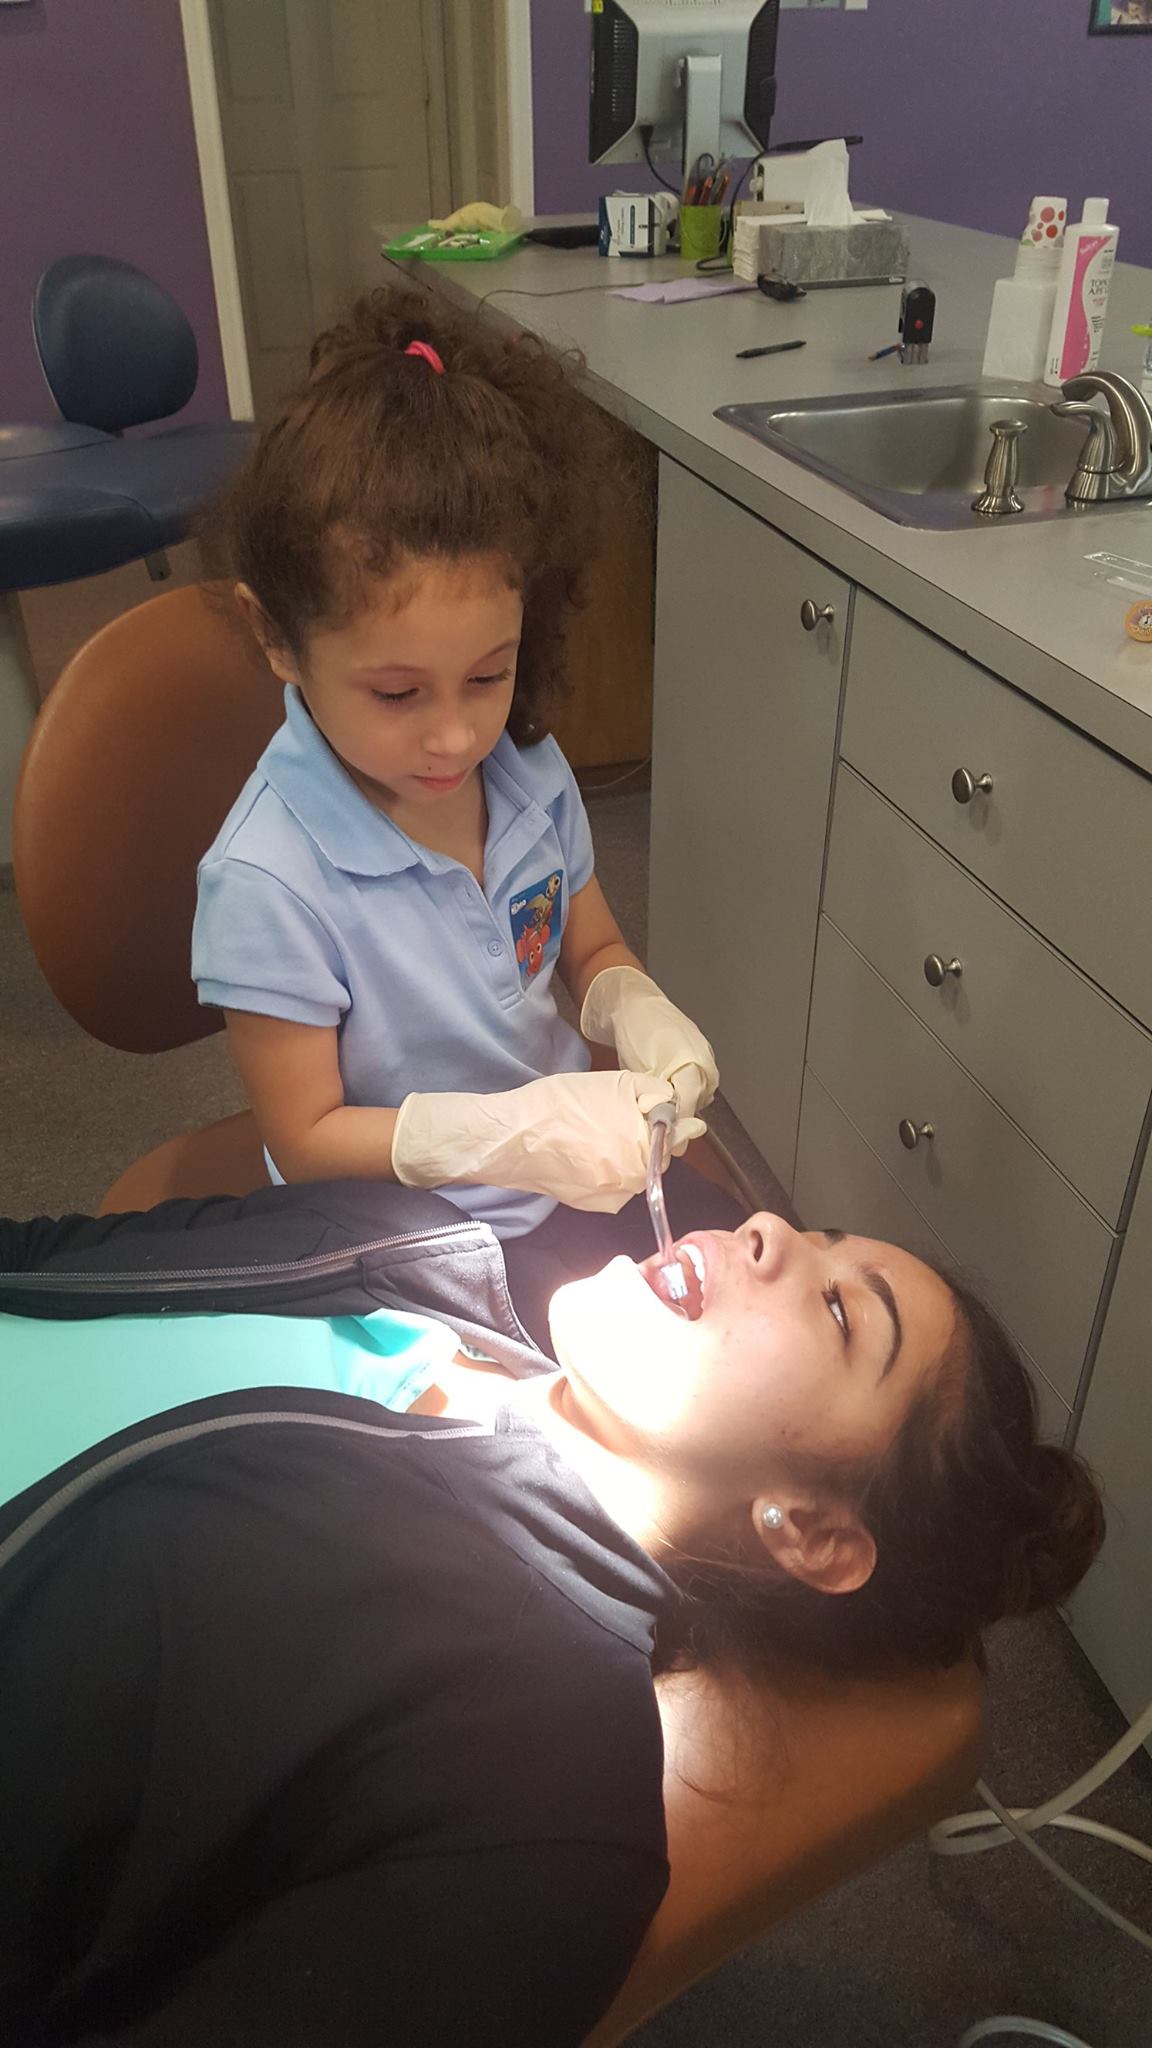 A patient gives her hygienist a mouth exam to show her how easy it is so she feels more comfortable with receiving dental services at Sycamore Smiles in Fort Worth, TX.